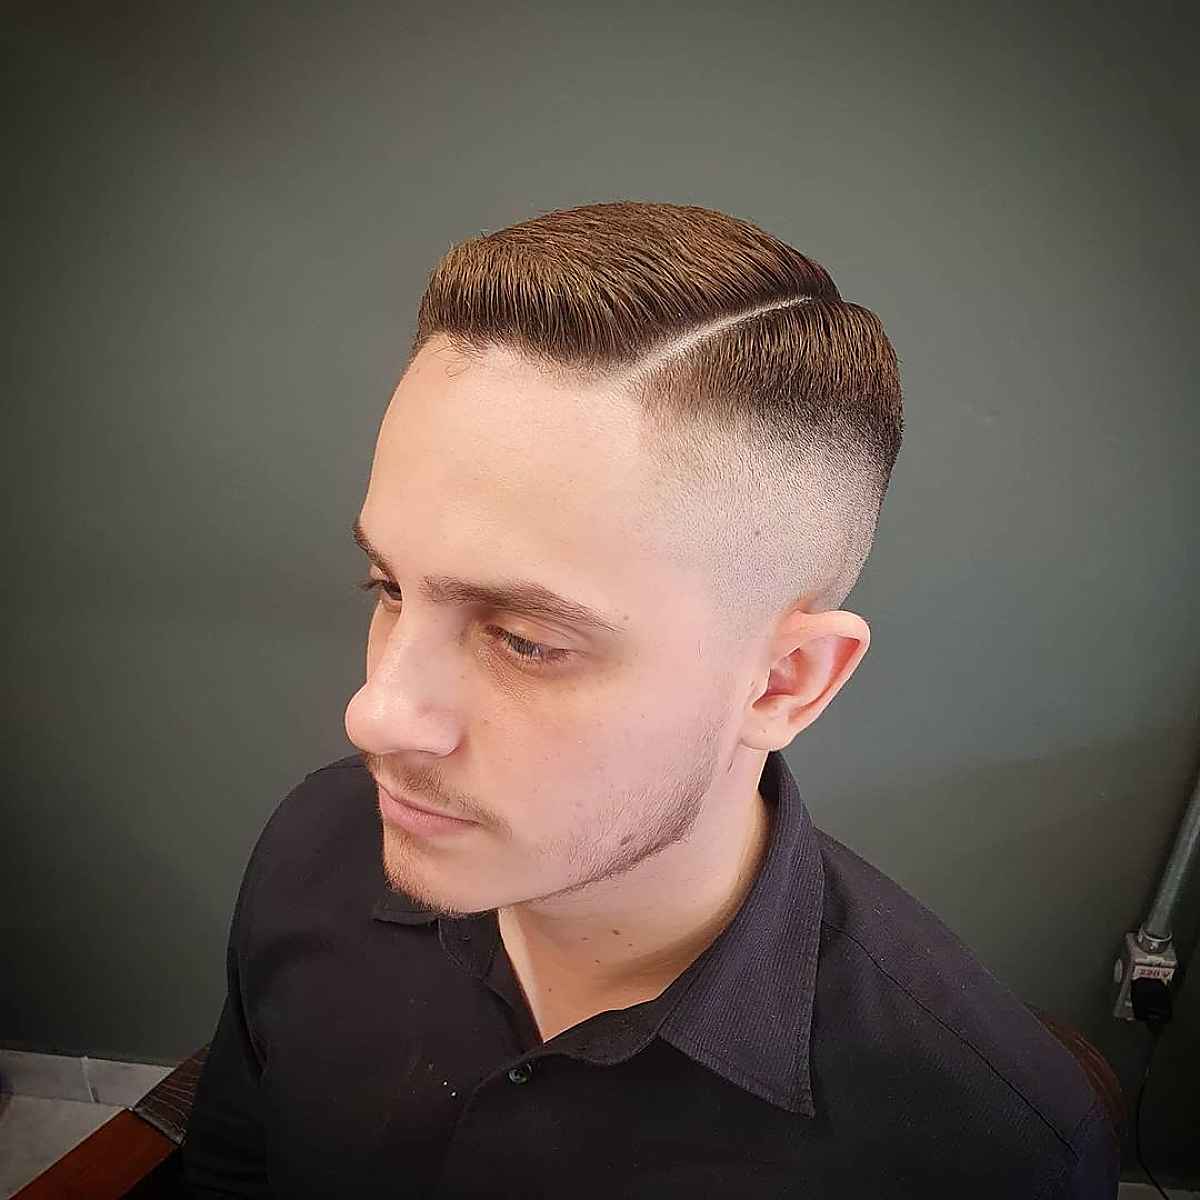 High-mid fade with shaved part